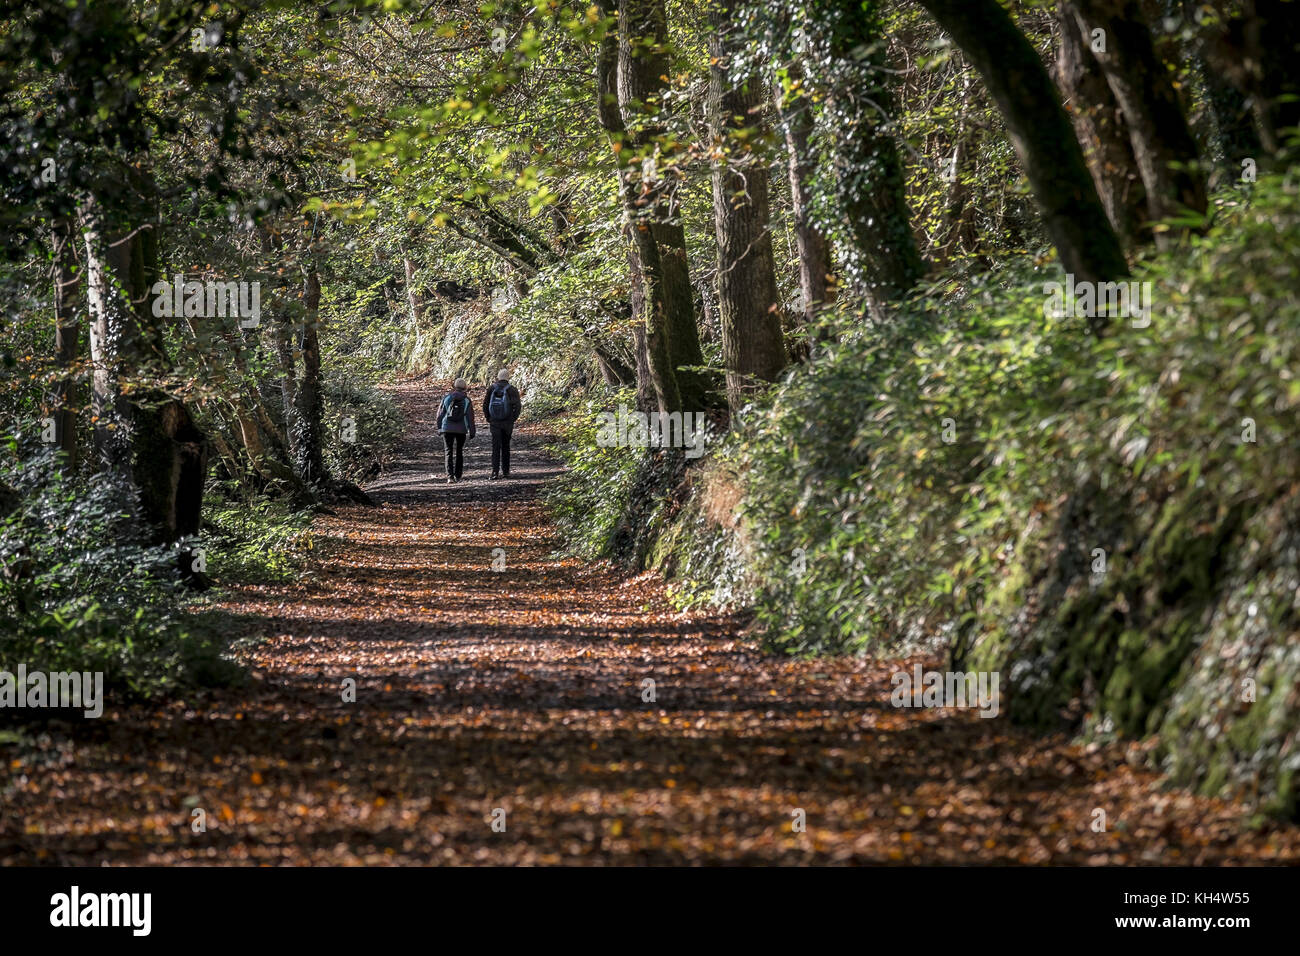 Walkers people enjoying an autumnal day in Tehidy Country Park Cornwall UK. Stock Photo